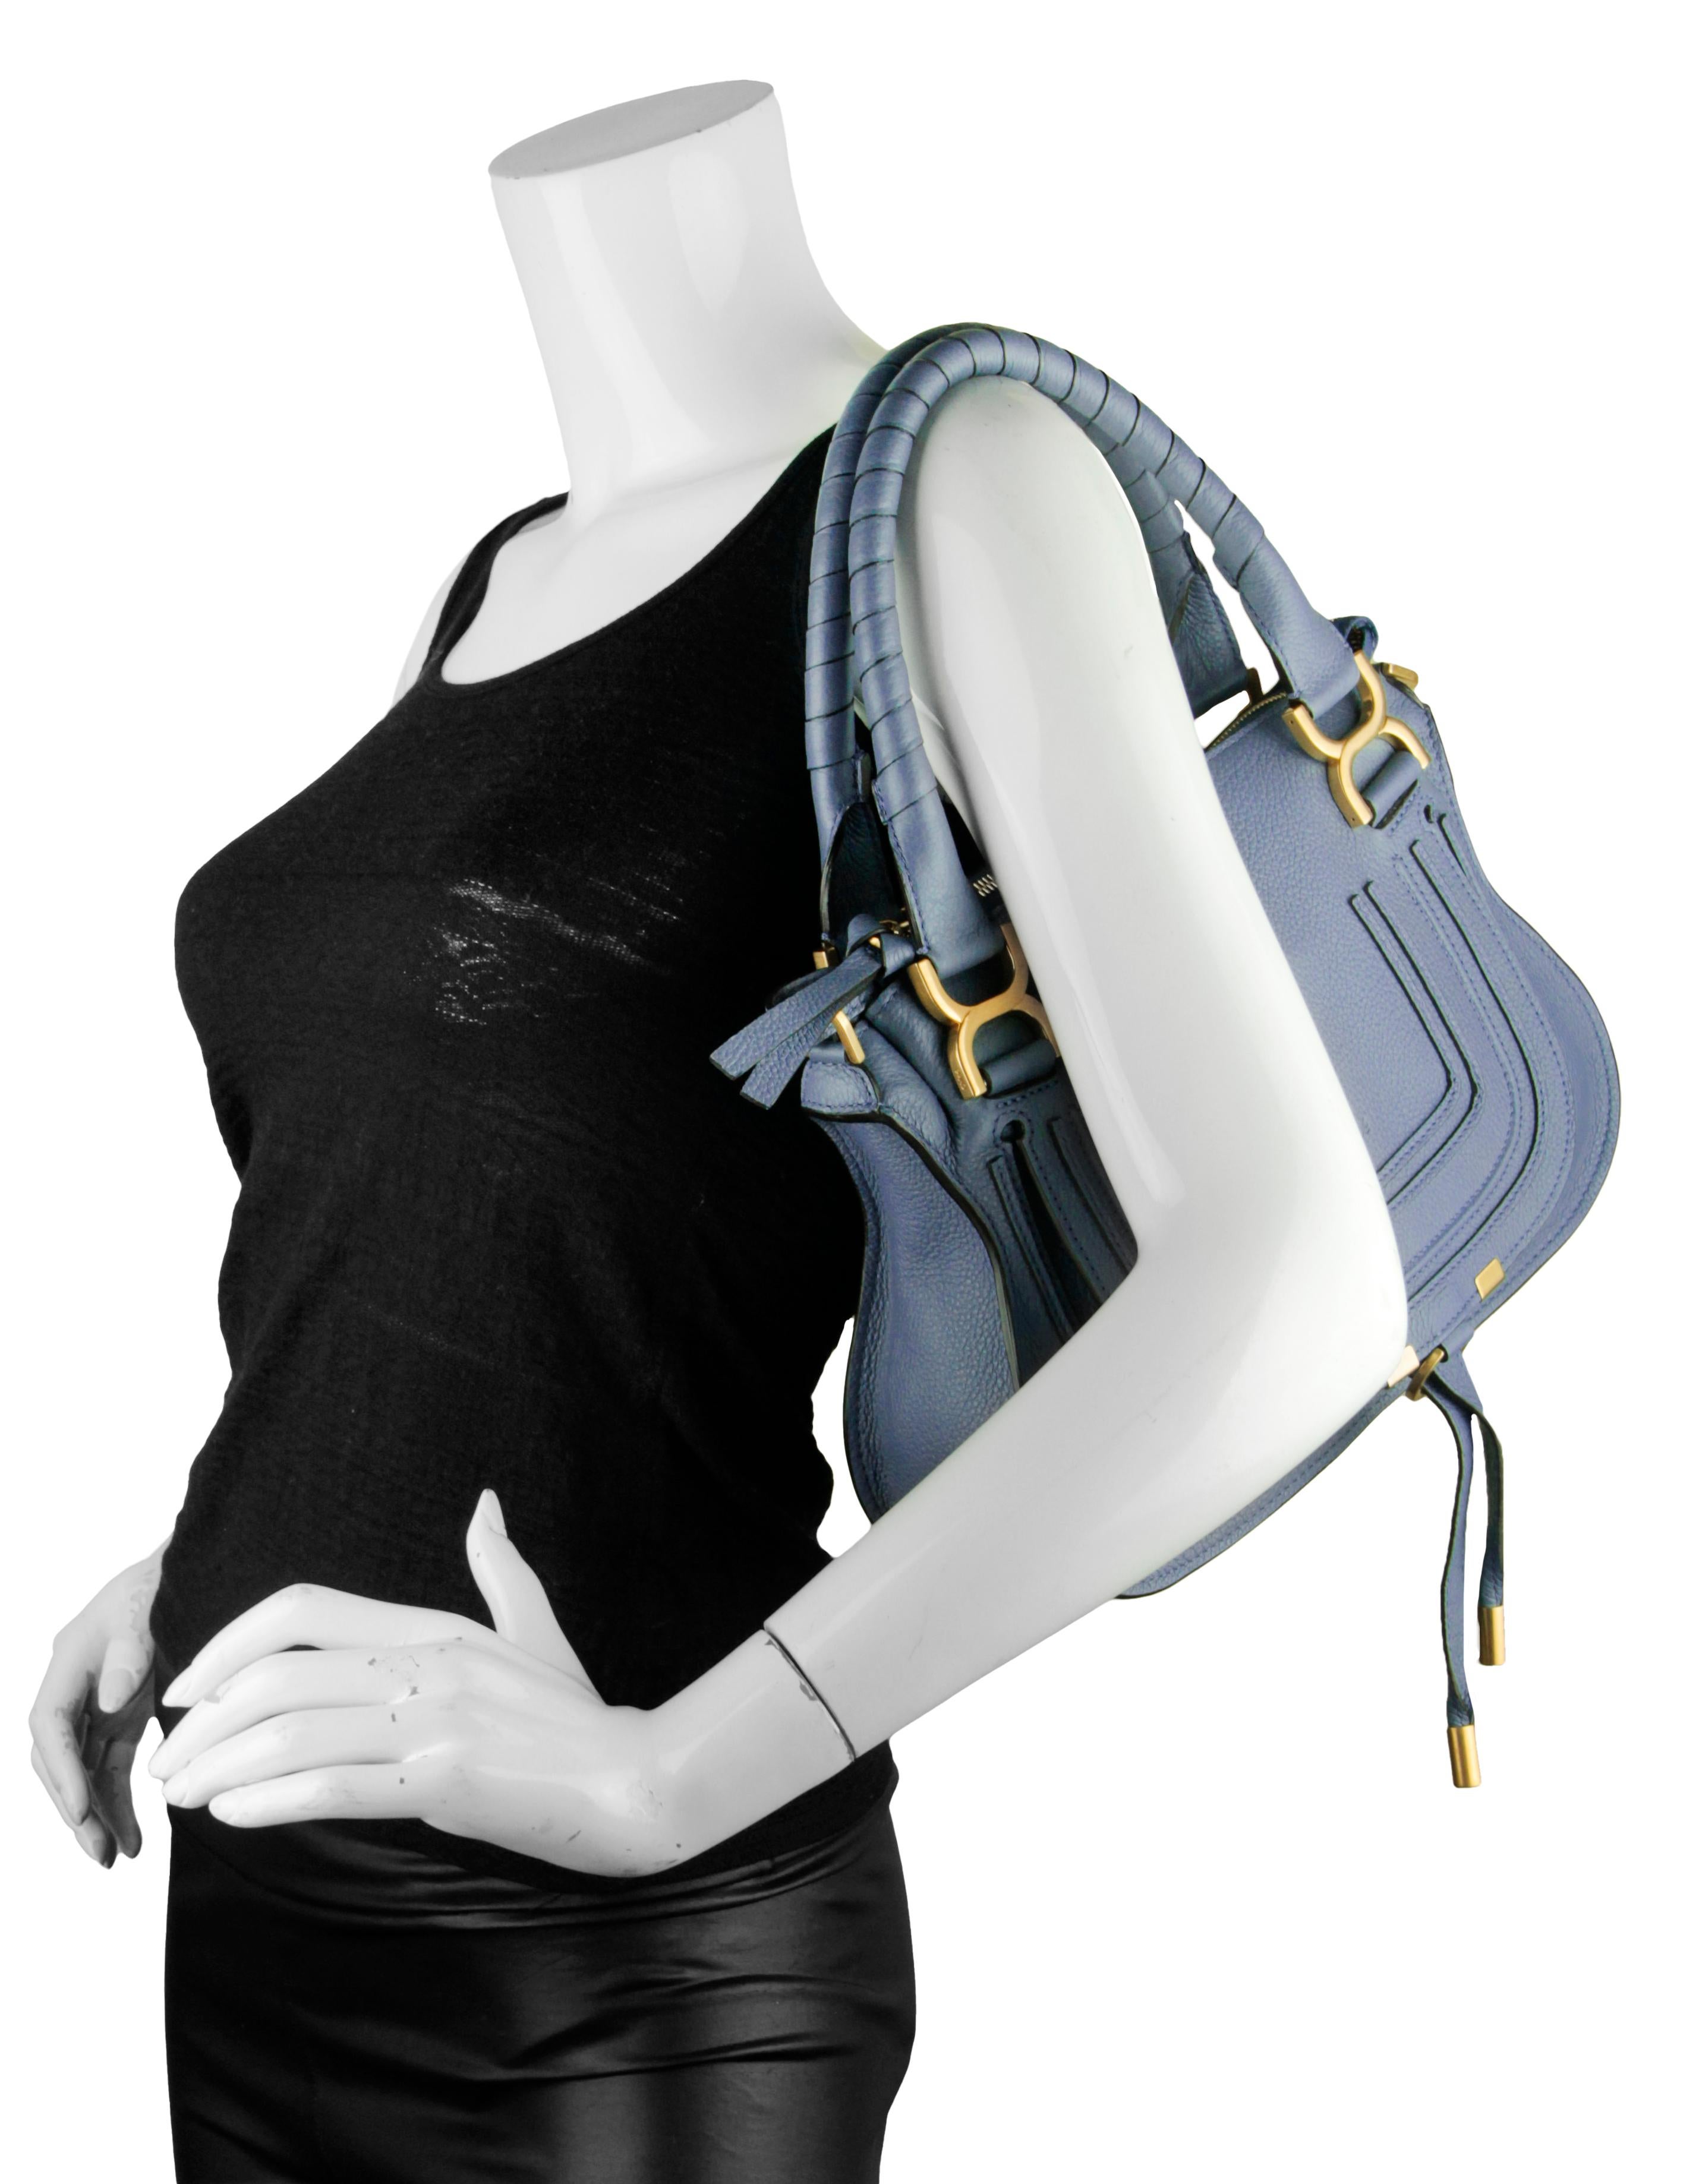 Chloe Graphite Navy Leather Small Marcie Satchel Bag

Made In: Italy
Color: Graphite navy
Hardware: Goldtone
Materials: Grained calfskin leather
Lining: Cotton lining
Closure/Opening: Zip top
Exterior Pockets: Front slit pocket under flap
Interior